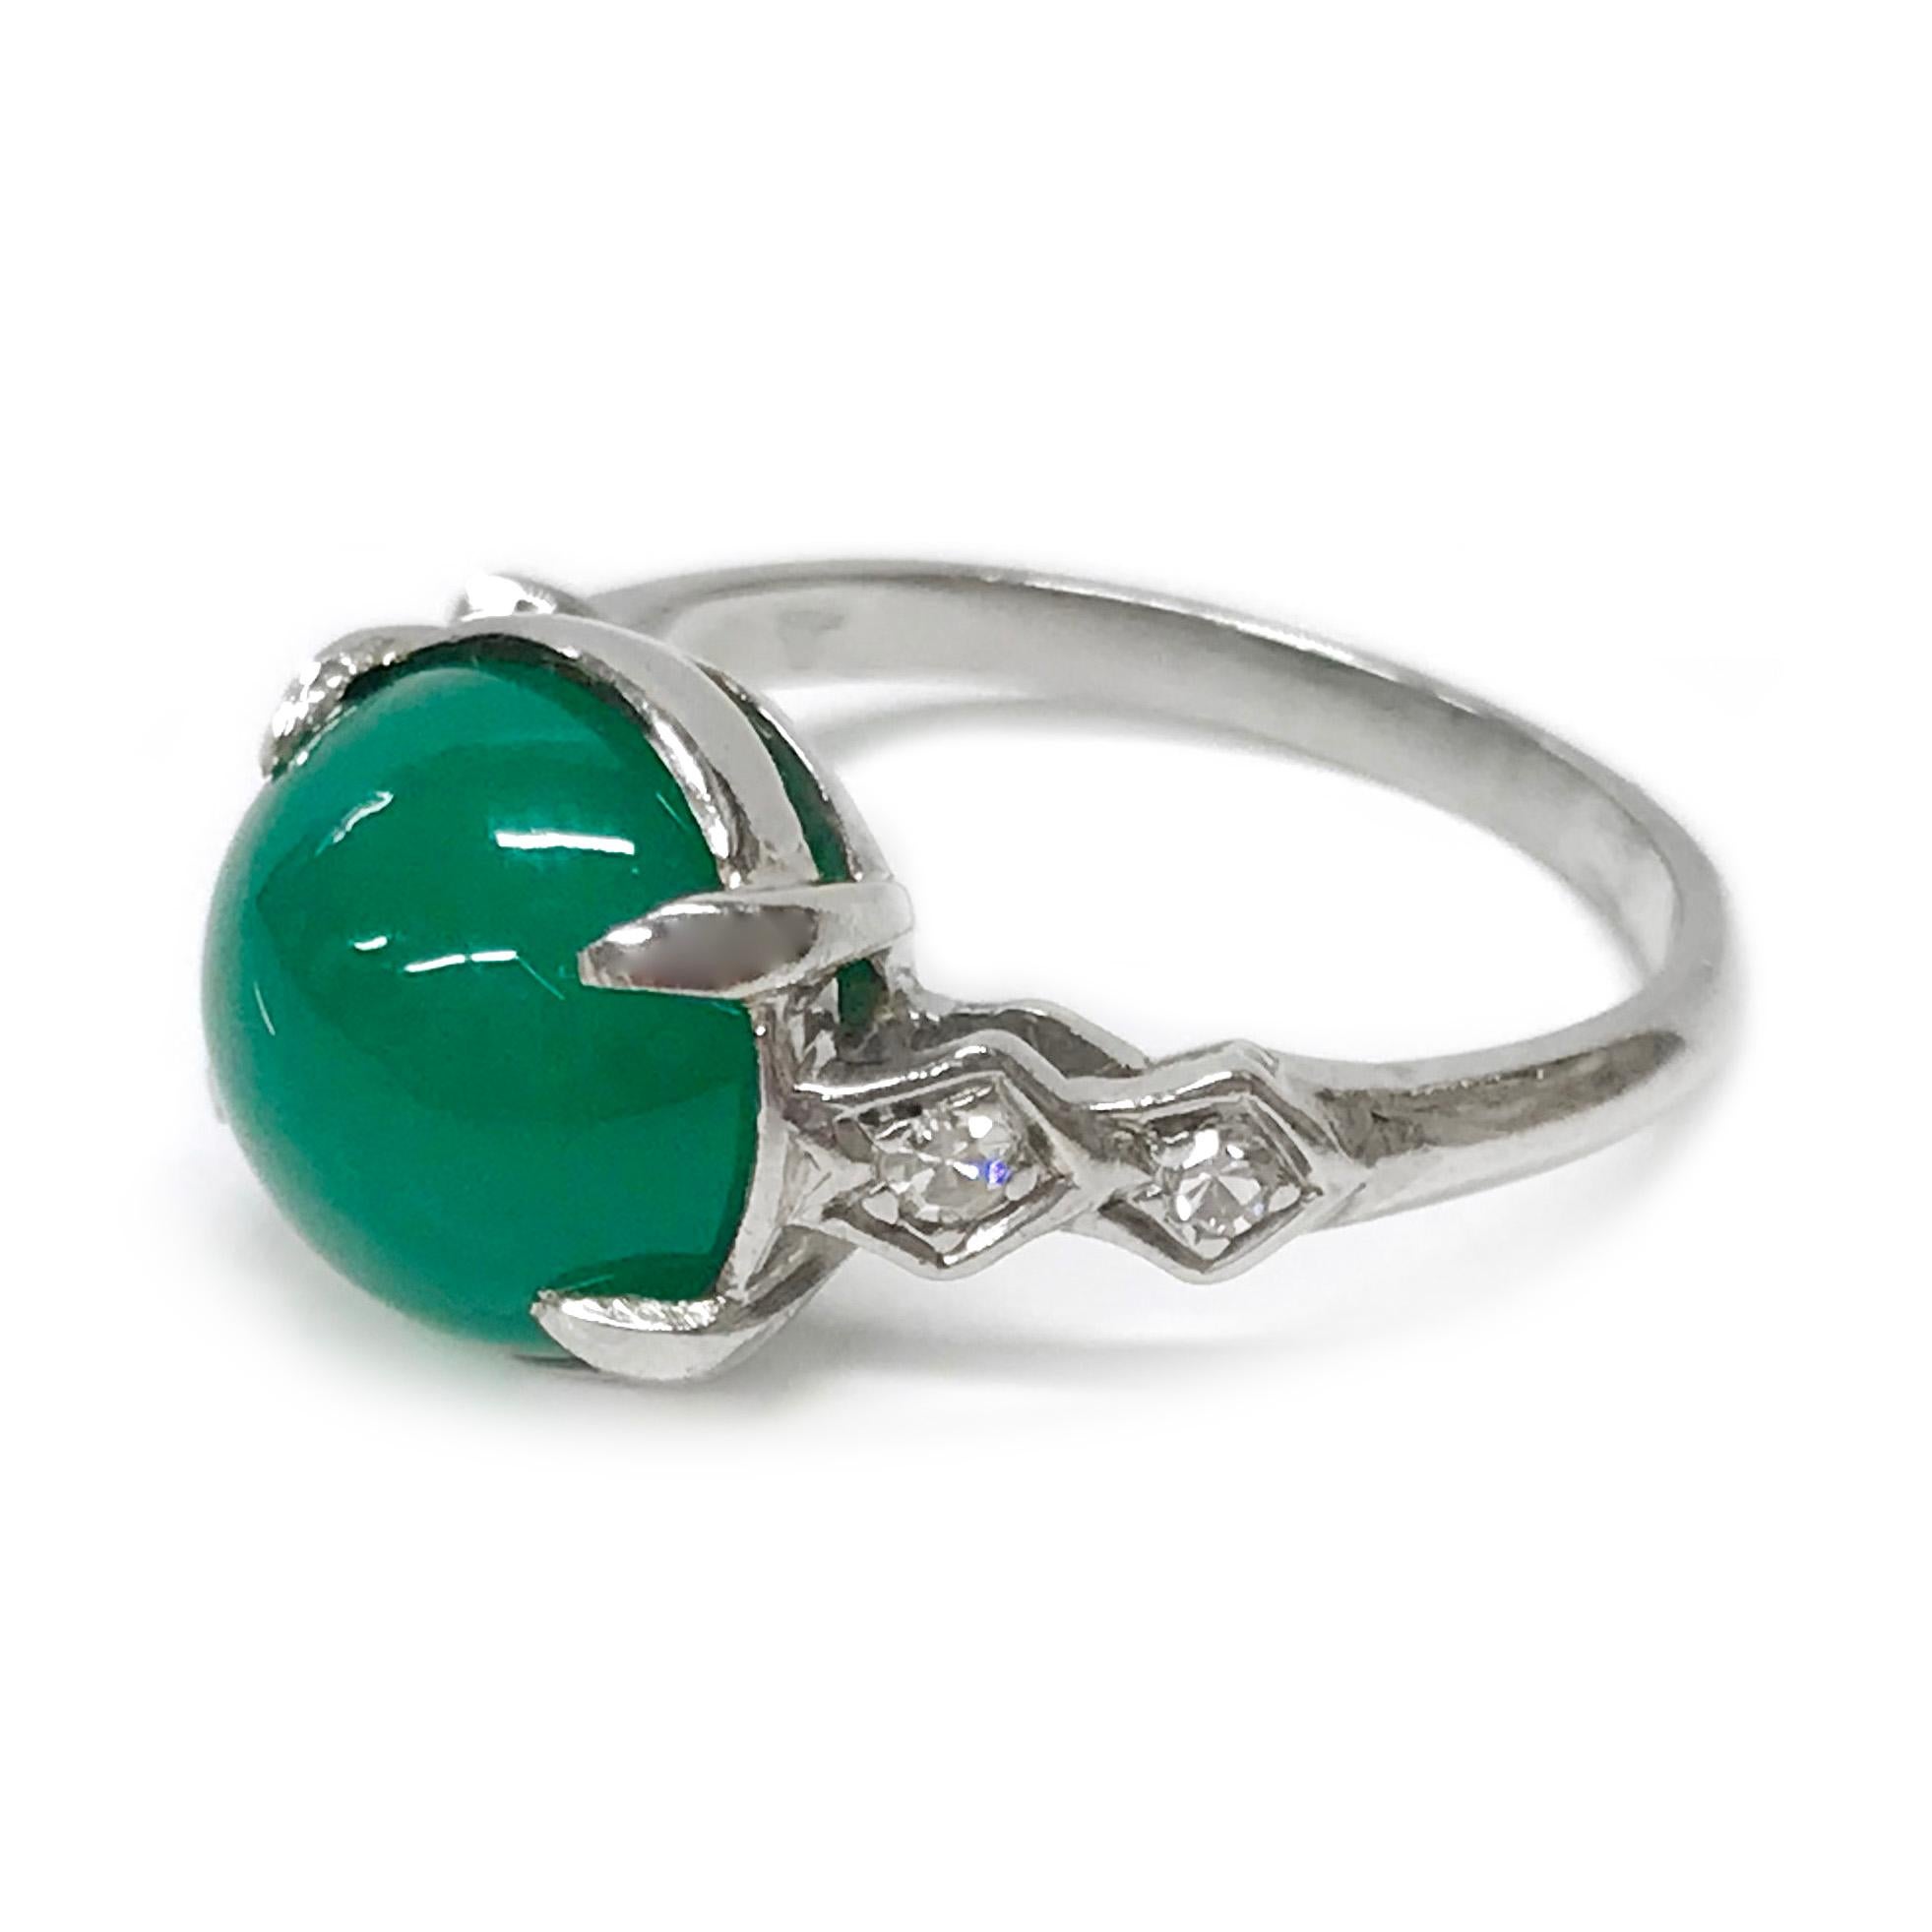 Platinum Chrysoprase Diamond Ring. The ring features a bezel-set round vivid green cabochon measuring 9.4mm with four round bead-set diamonds. The total carat weight of the diamonds is 0.10cts. The ring size is 4 1/2. The total gold weight is 3.9